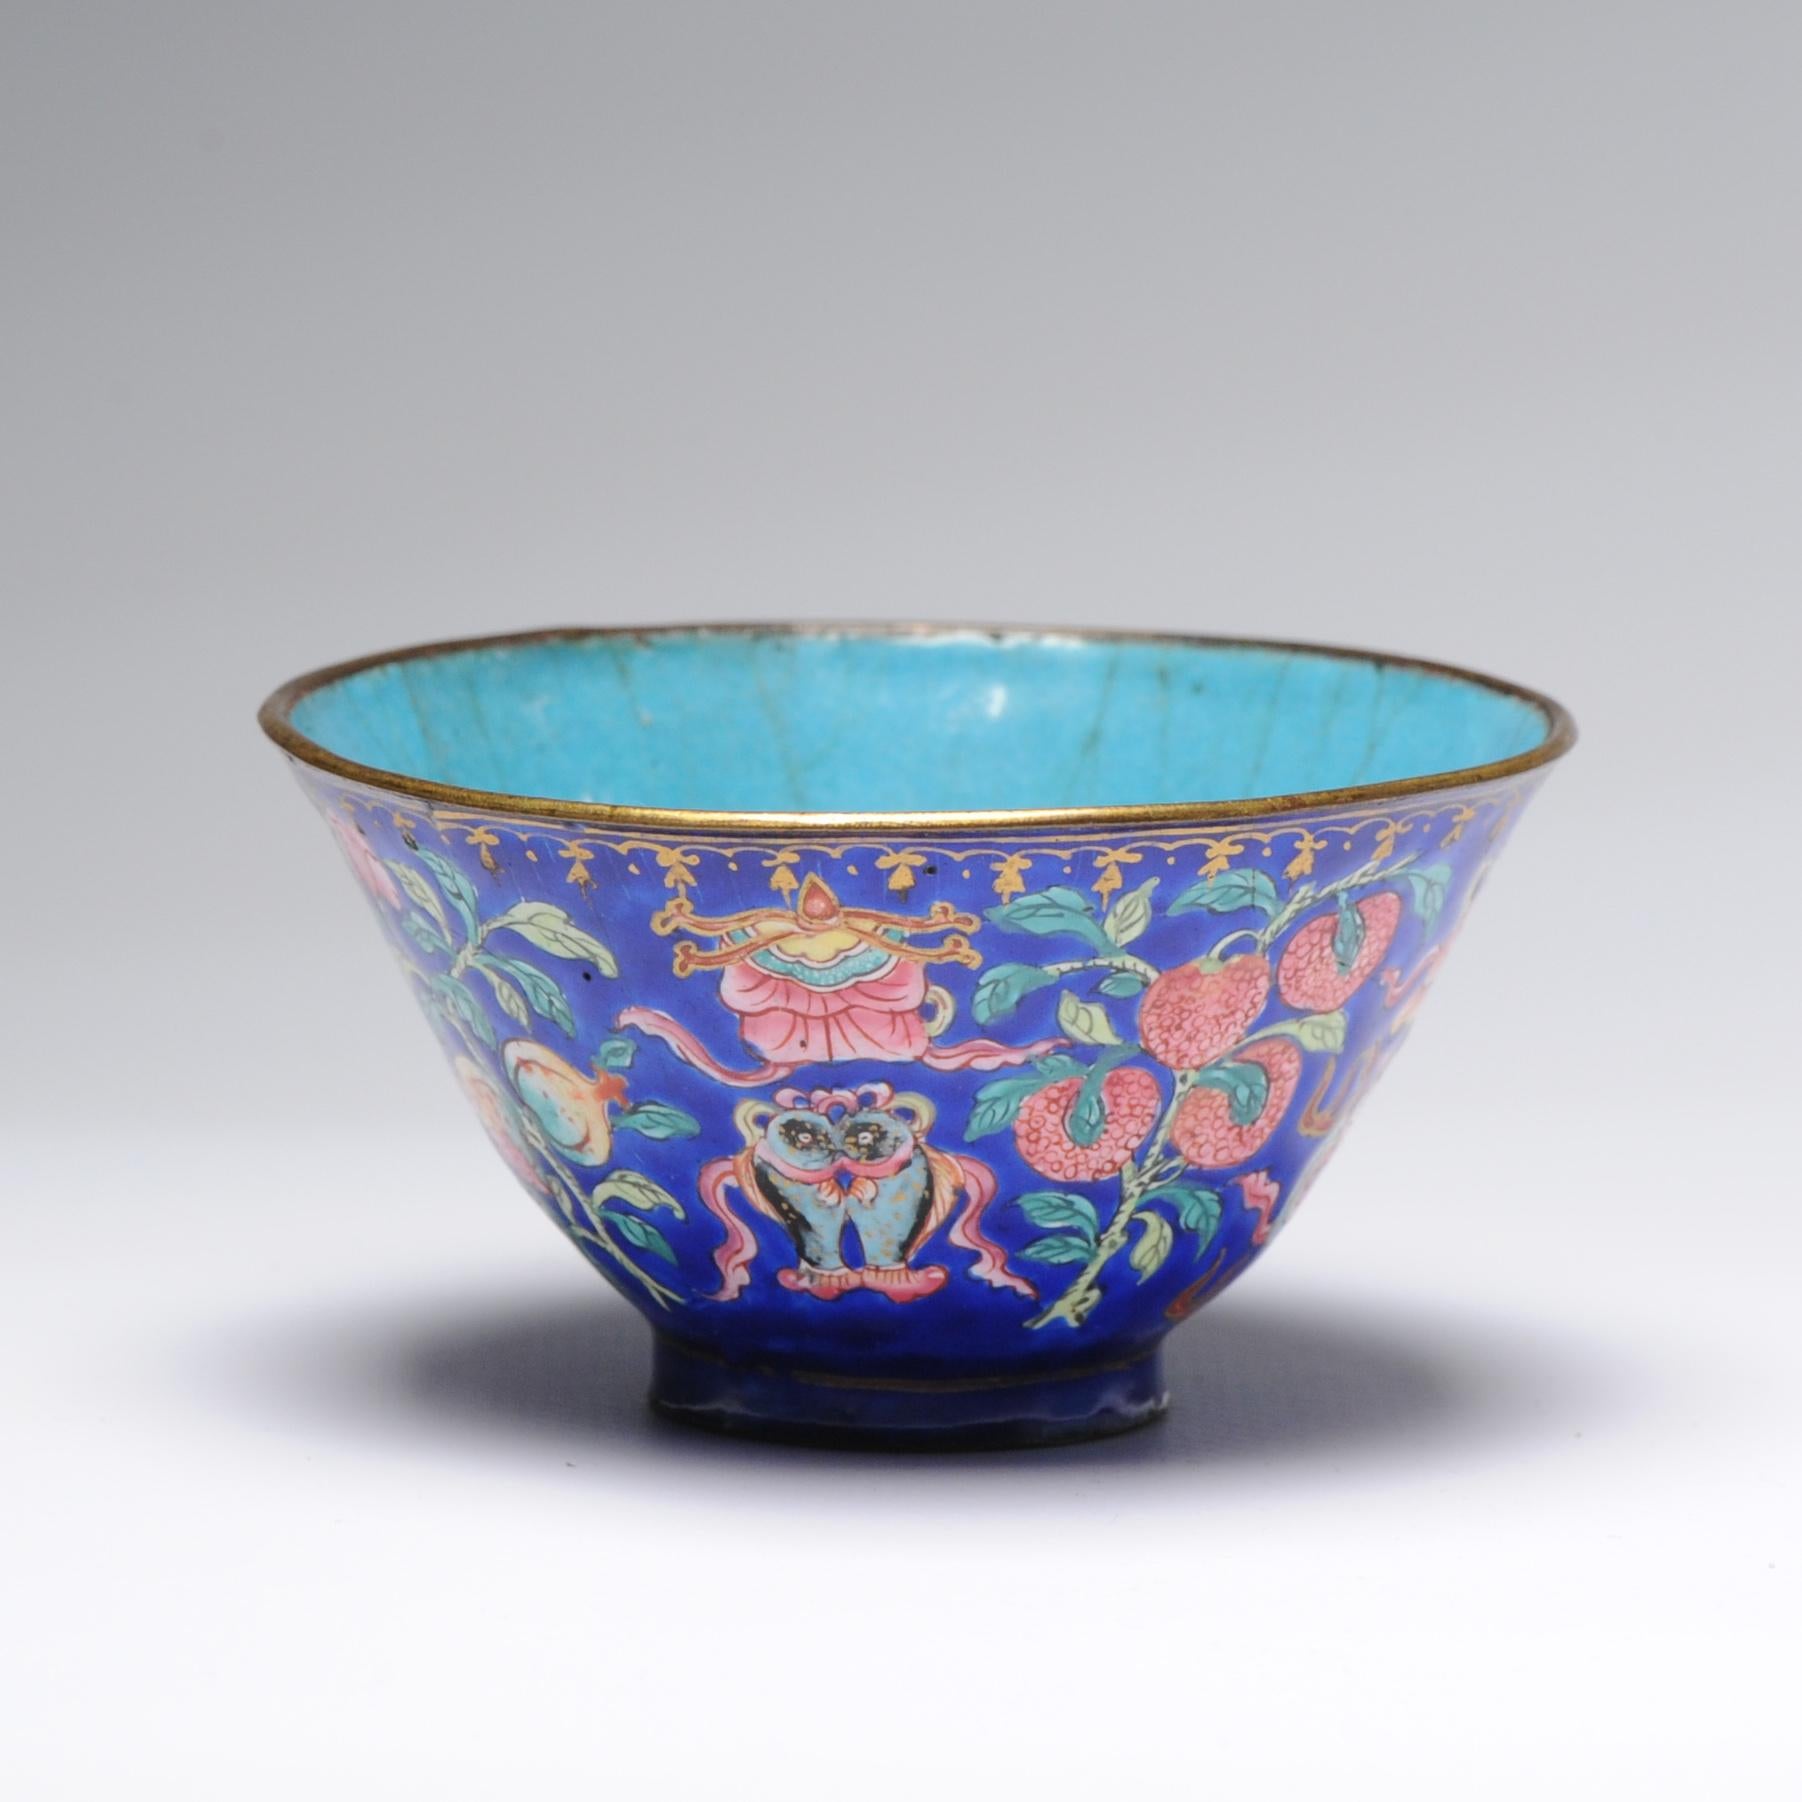 Description

A very nicely made piece of 18th century enamel on bronze. Canton Qianlong. Very colorfull and with Bajixiang and flowers.

Condition
Overall Condition crackled on the inside (small chip missing) and some tiny crackle lines outside